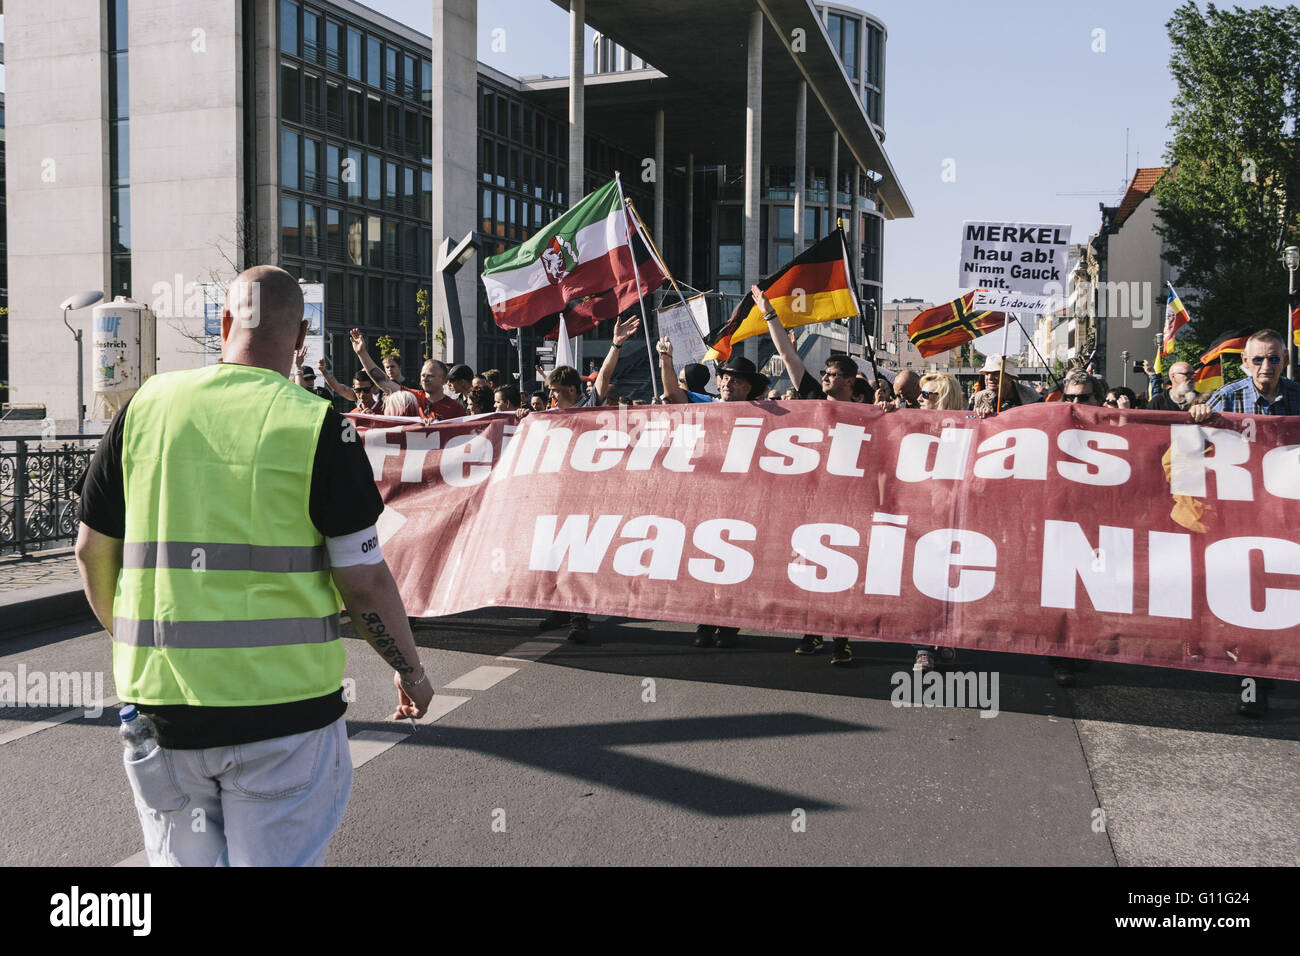 Berlin, Berlin, Germany. 7th May, 2016. Protesters react to counter-activists near Berlin Reichstag during the rally held under the motto 'Merkel muss weg![Merkel must go]' organised by far-right group 'We for Berlin & We for Germany' Credit:  Jan Scheunert/ZUMA Wire/Alamy Live News Stock Photo